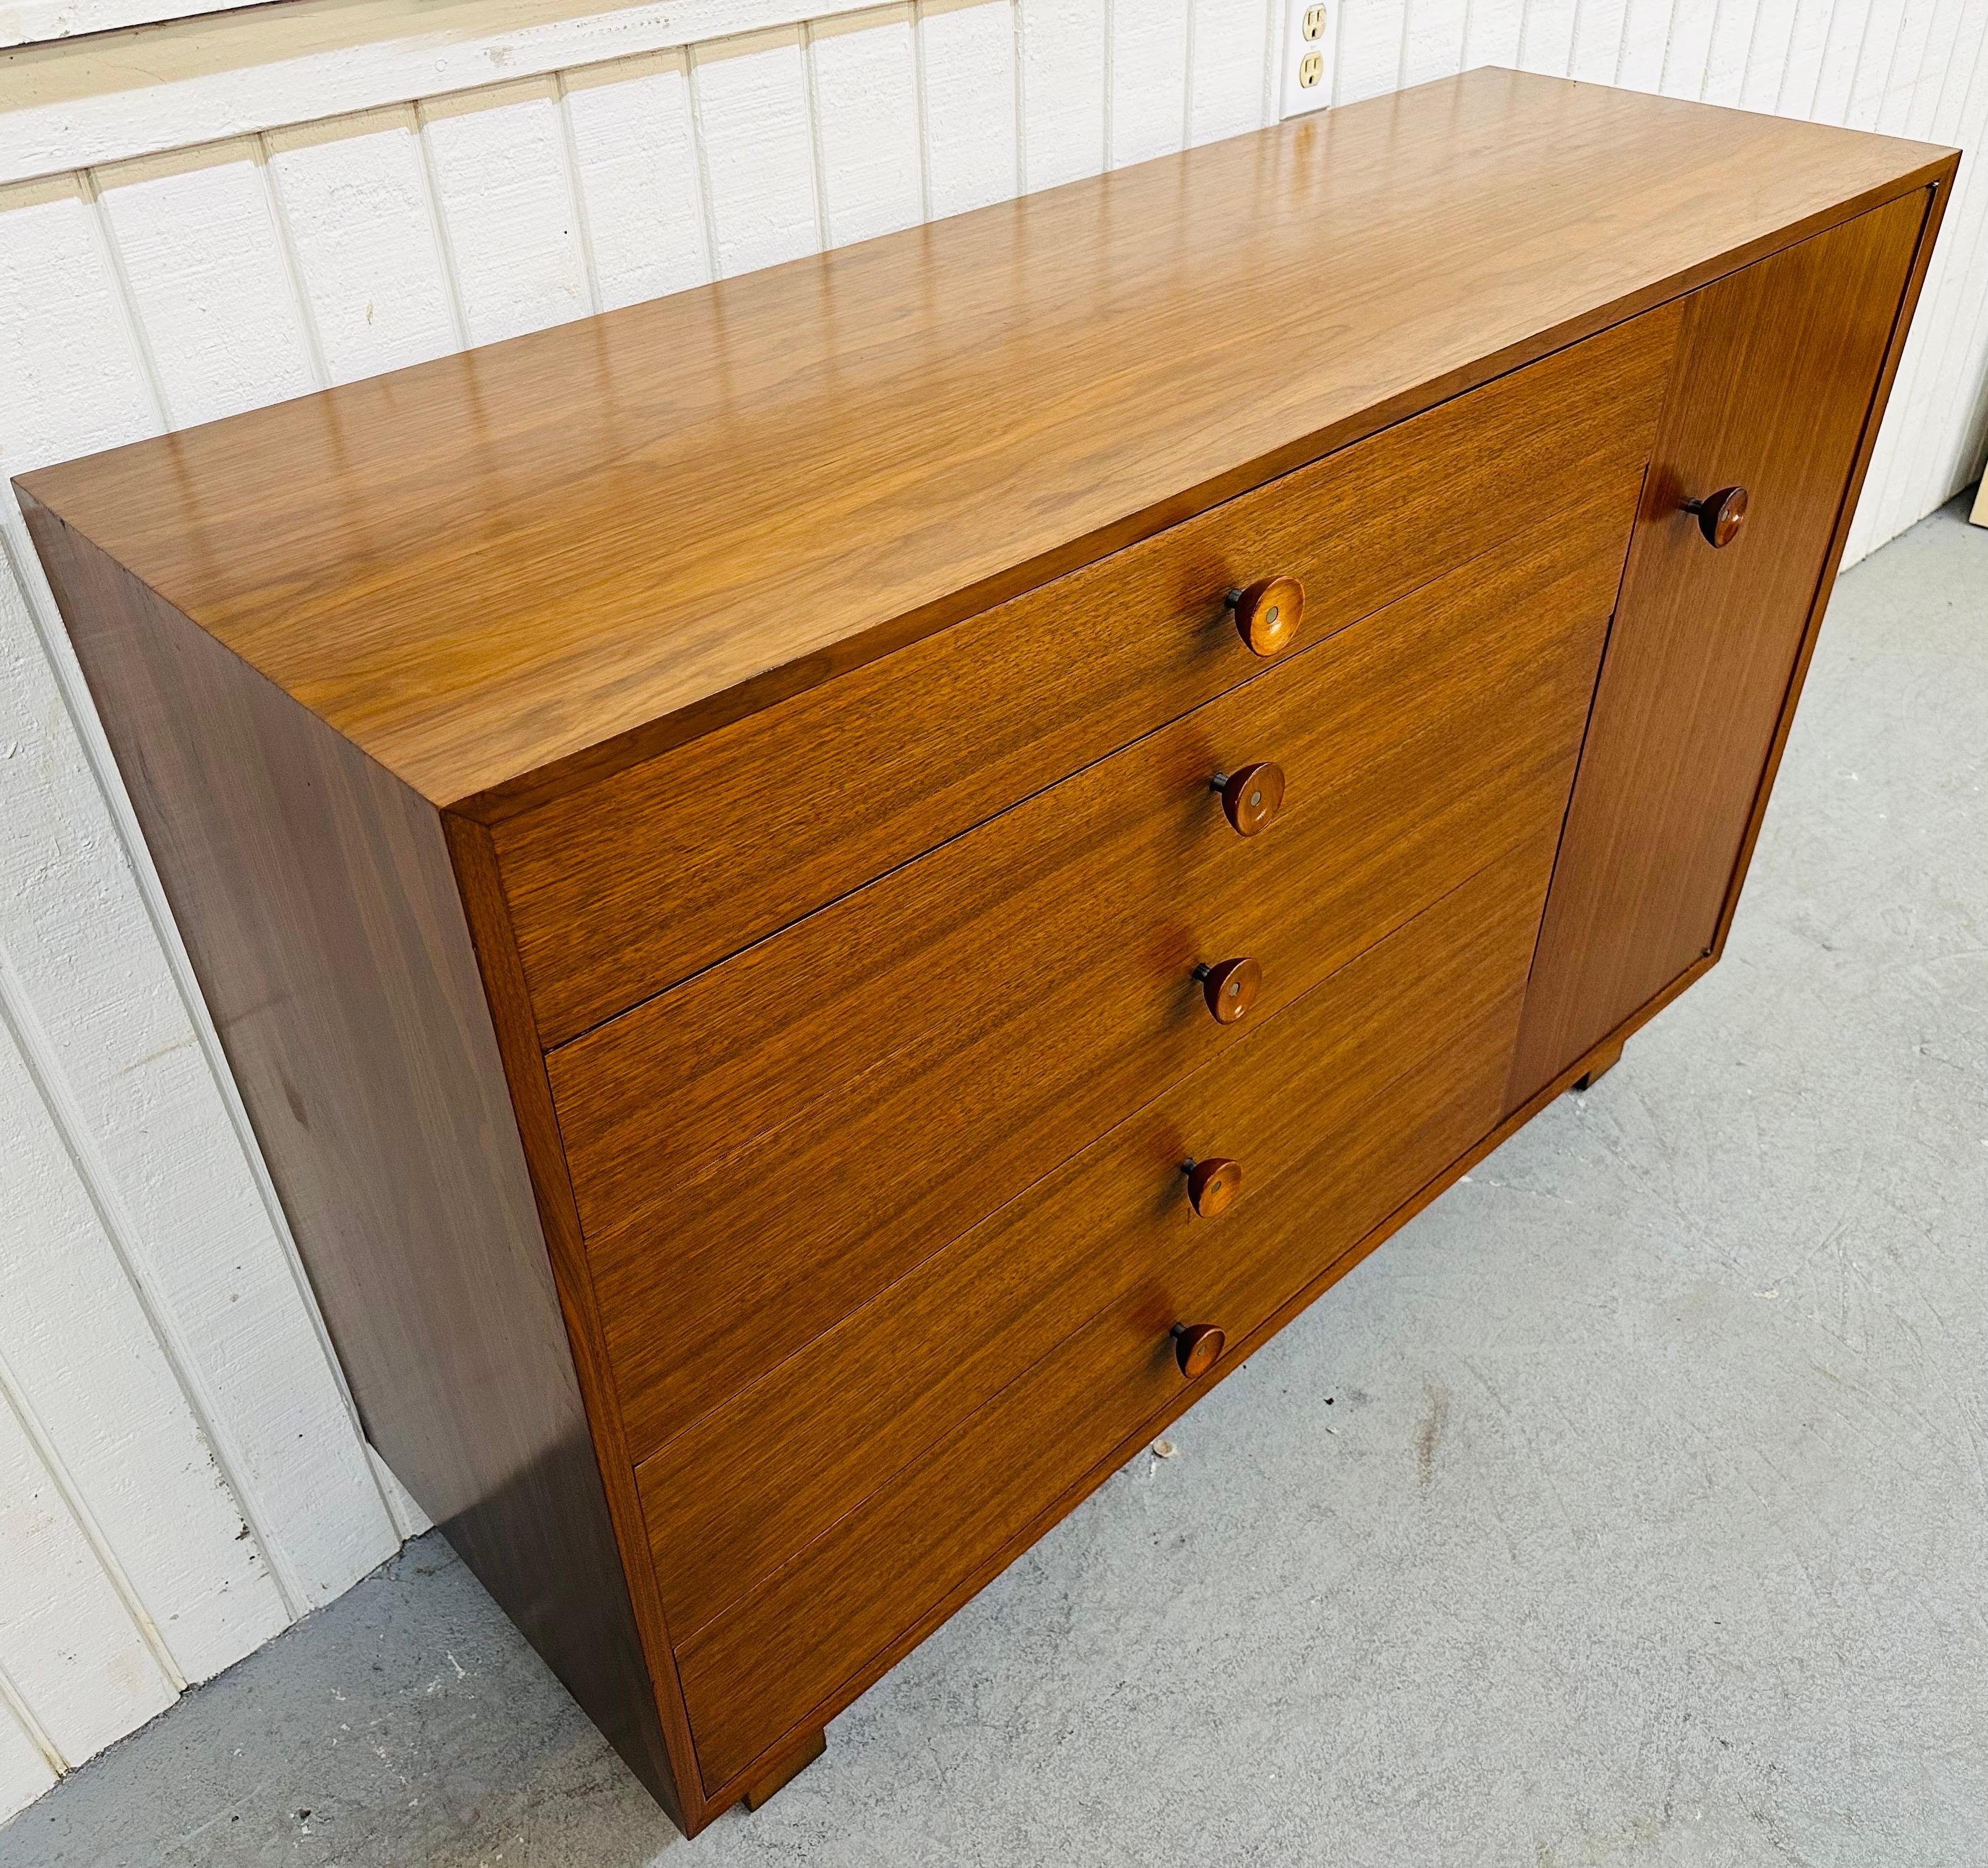 This listing is for a Mid-Century Modern Herman Miller Walnut Dresser for designer George Nelson. Featuring a rectangular straight line design, five drawers for storage, one door that opens up to storage space, a sliding tie rack, and original